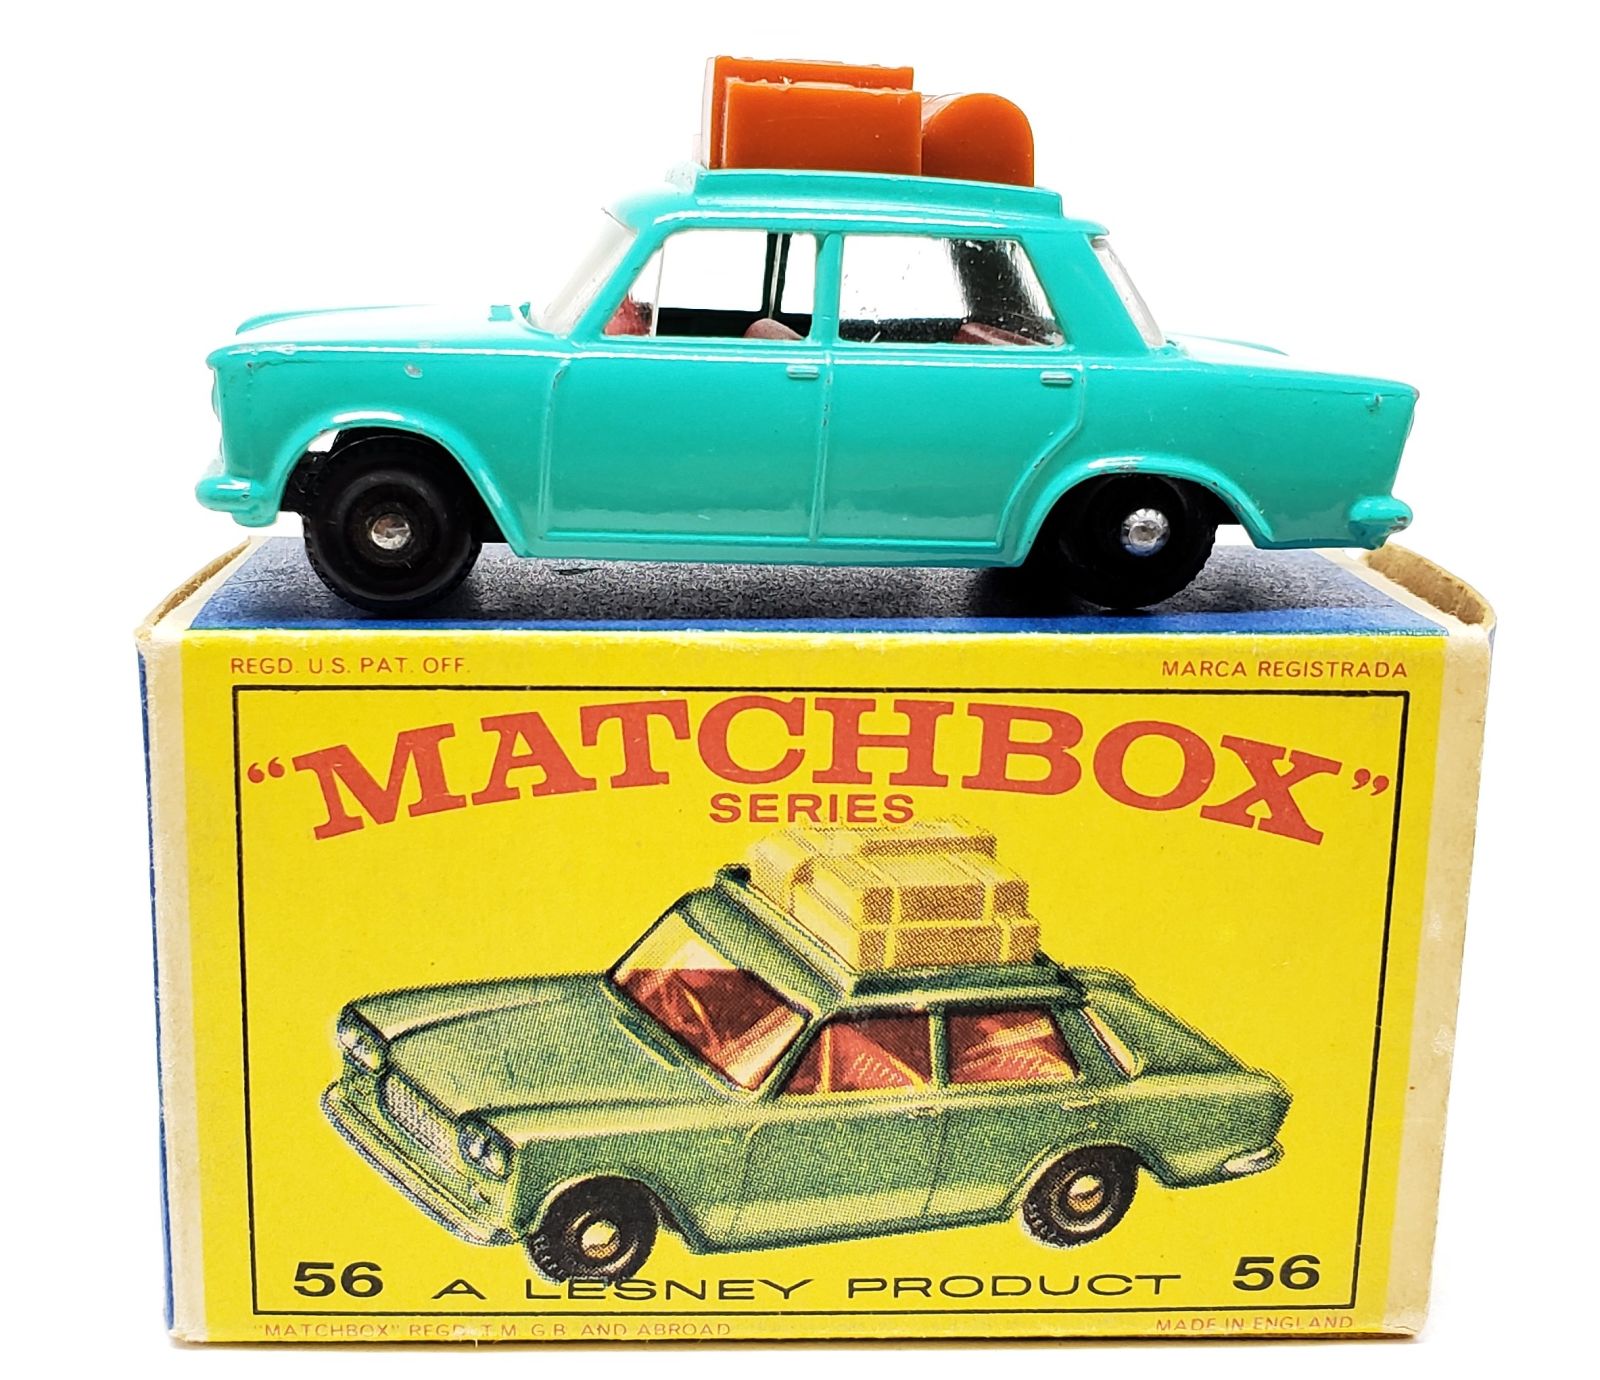 Illustration for article titled [REVIEW] Lesney Matchbox Fiat 1500